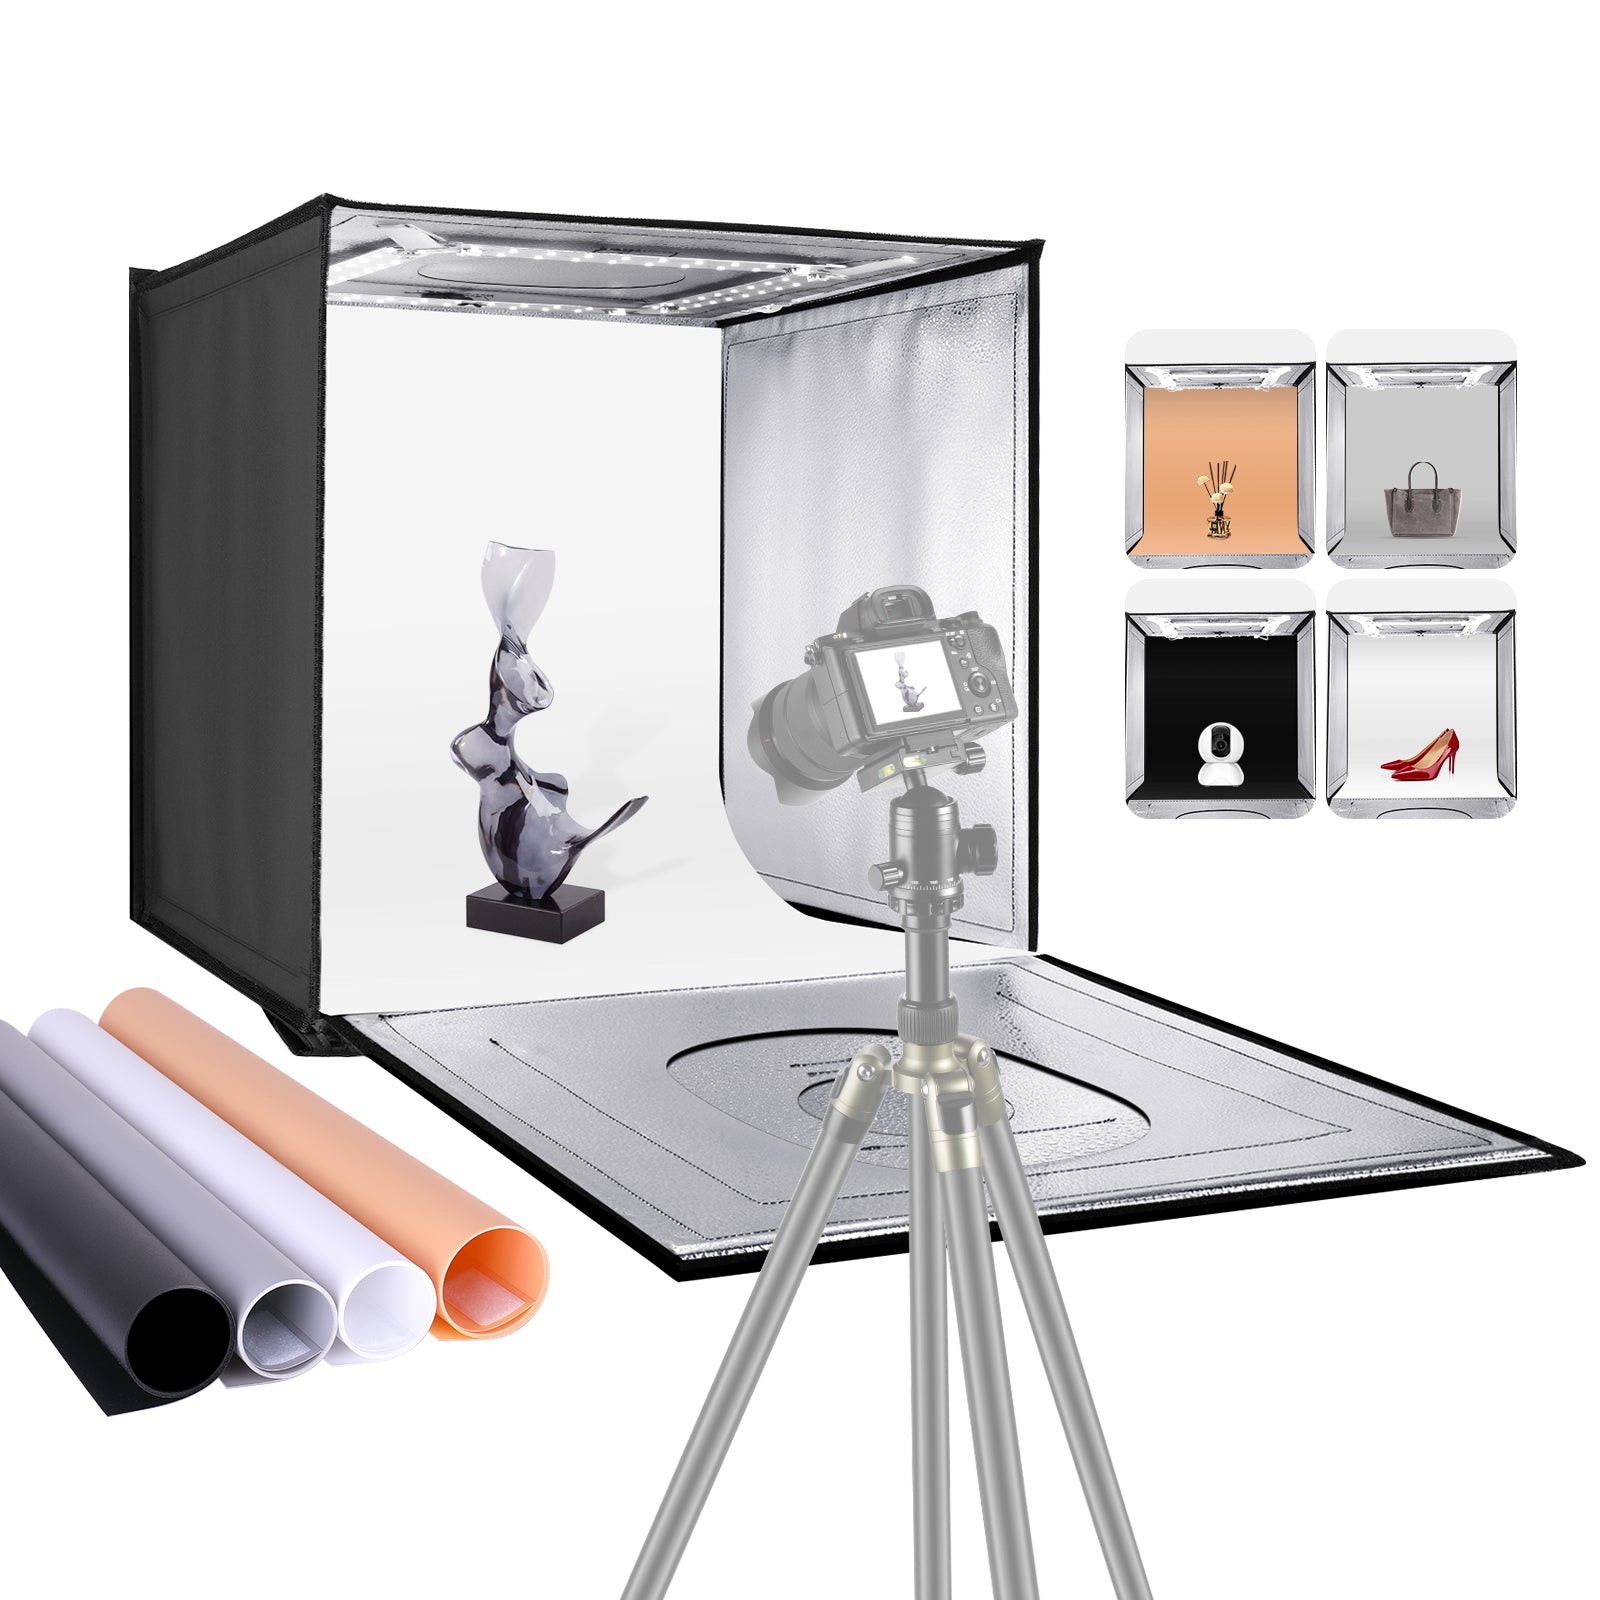 LED Photography Lights, Studio And Location